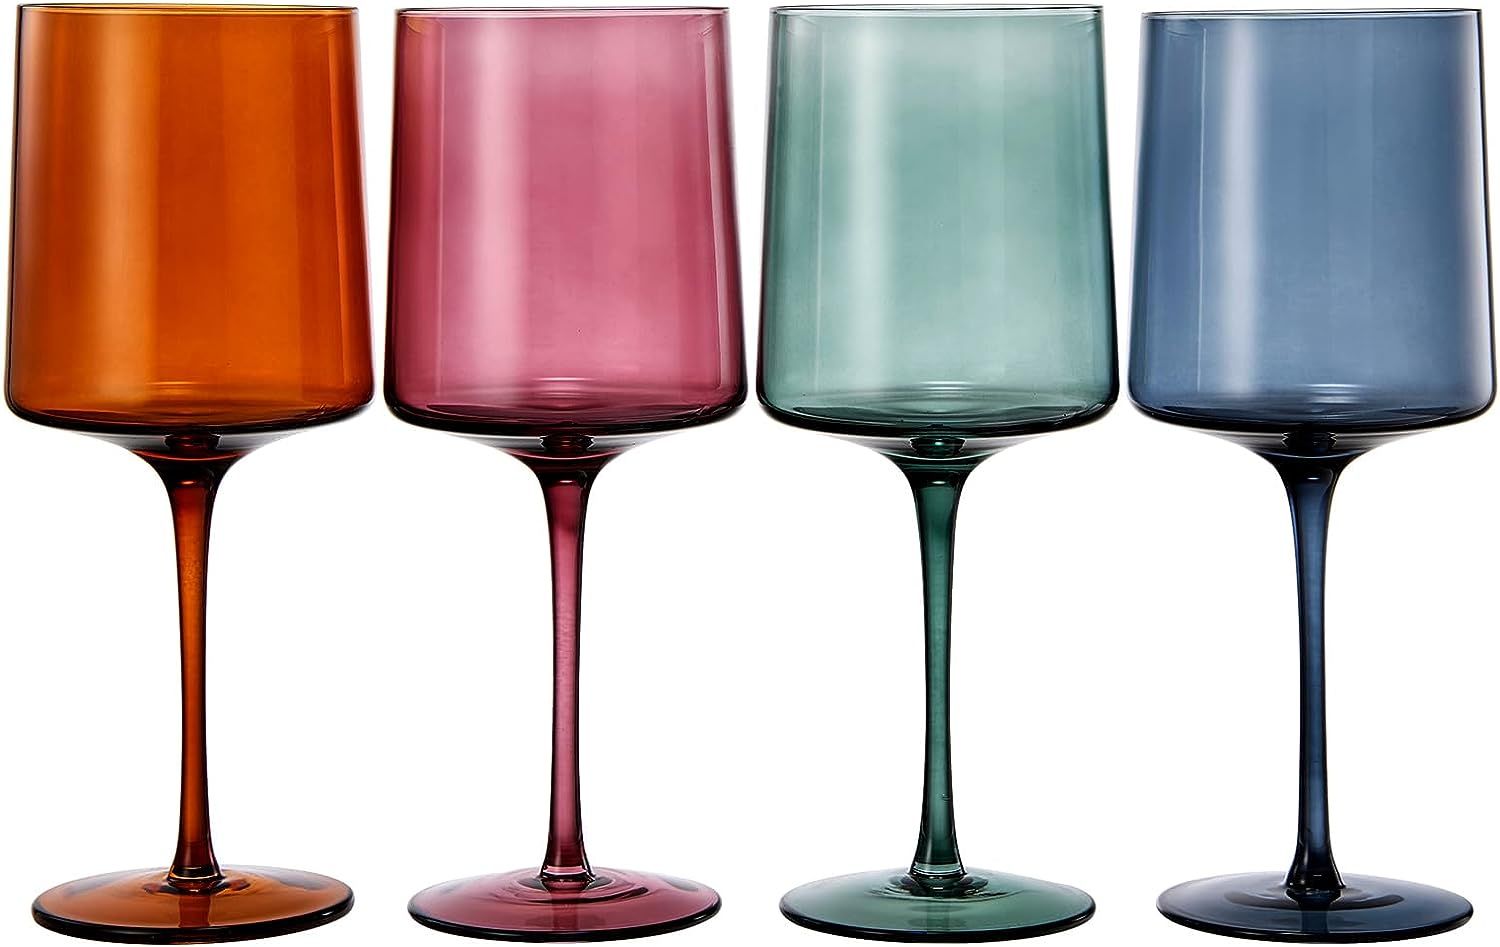 Muted Colored Square Crystal Wine Glasses Set of 4, Gift For Her, Him, Wife, Friend - Large 13.5 ... | Amazon (US)